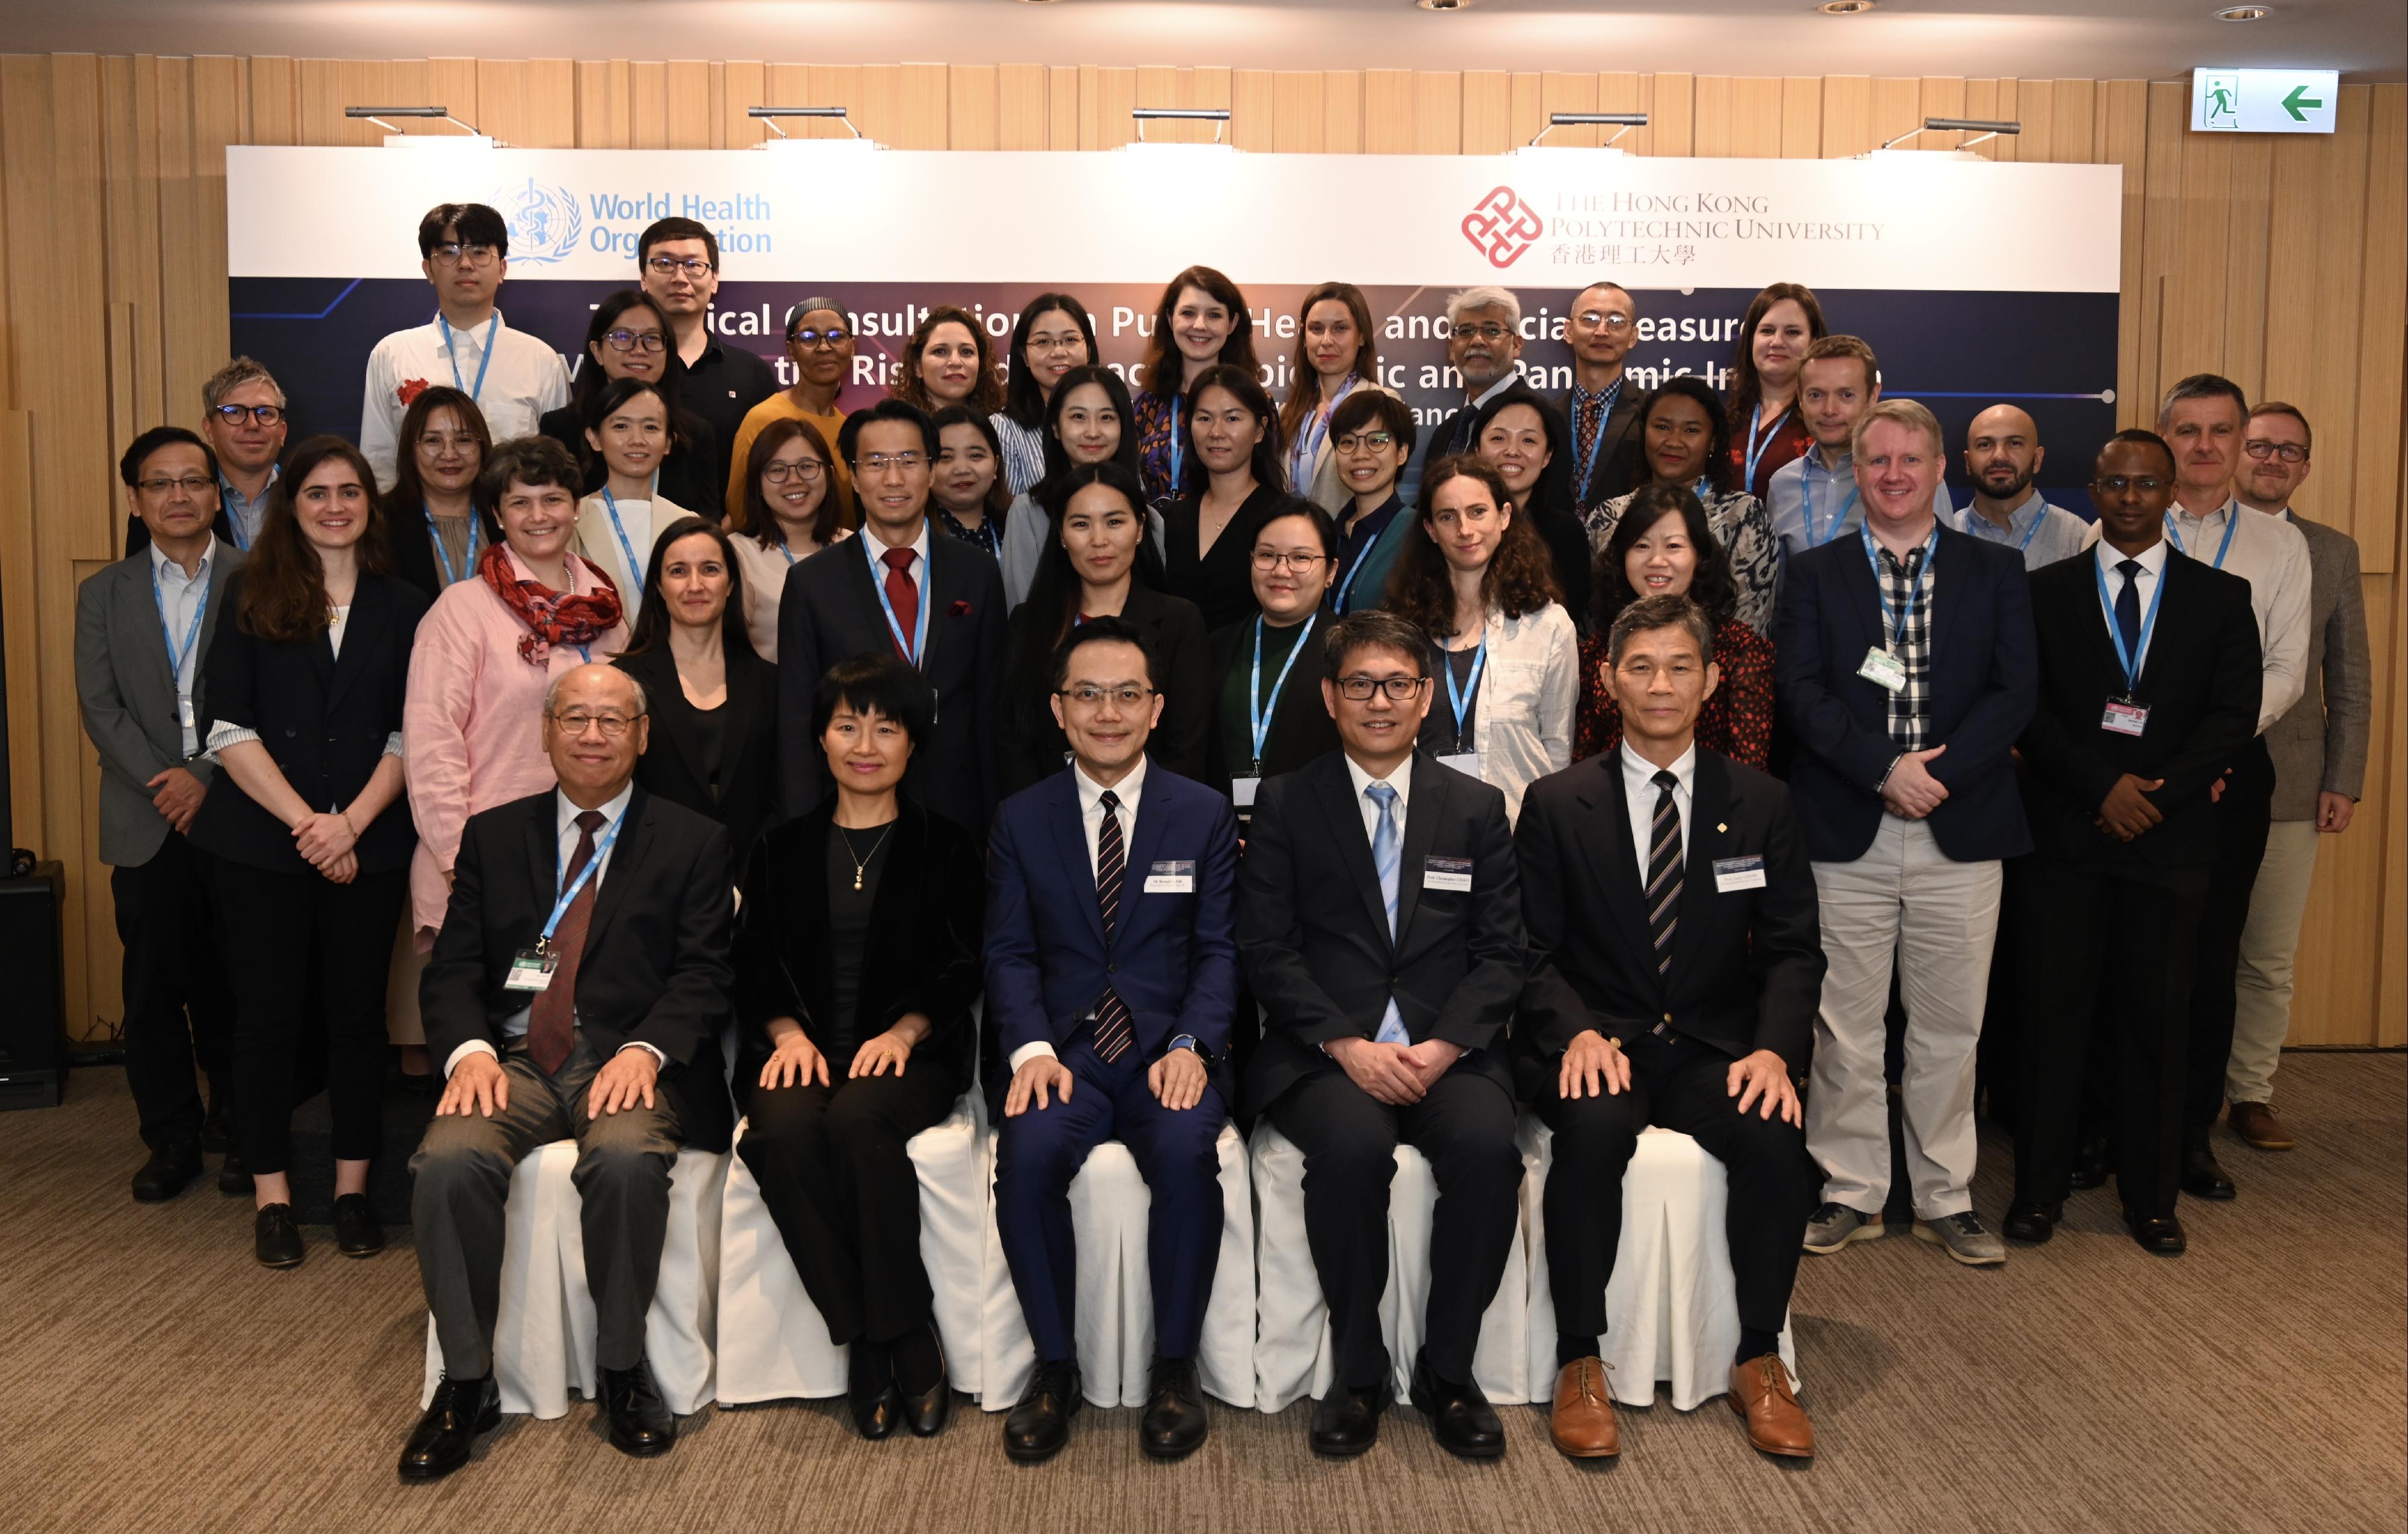 The World Health Organization today (June 27) held a technical consultation on public health and social measures (PHSMs) for mitigating the risk and impact of epidemic and pandemic influenza in Hong Kong. The Director of Health, Dr Ronald Lam, attended the meeting today and delivered his opening remarks, sharing his insights on PHSMs. Photo shows Dr Lam (first row, centre) with other participants.